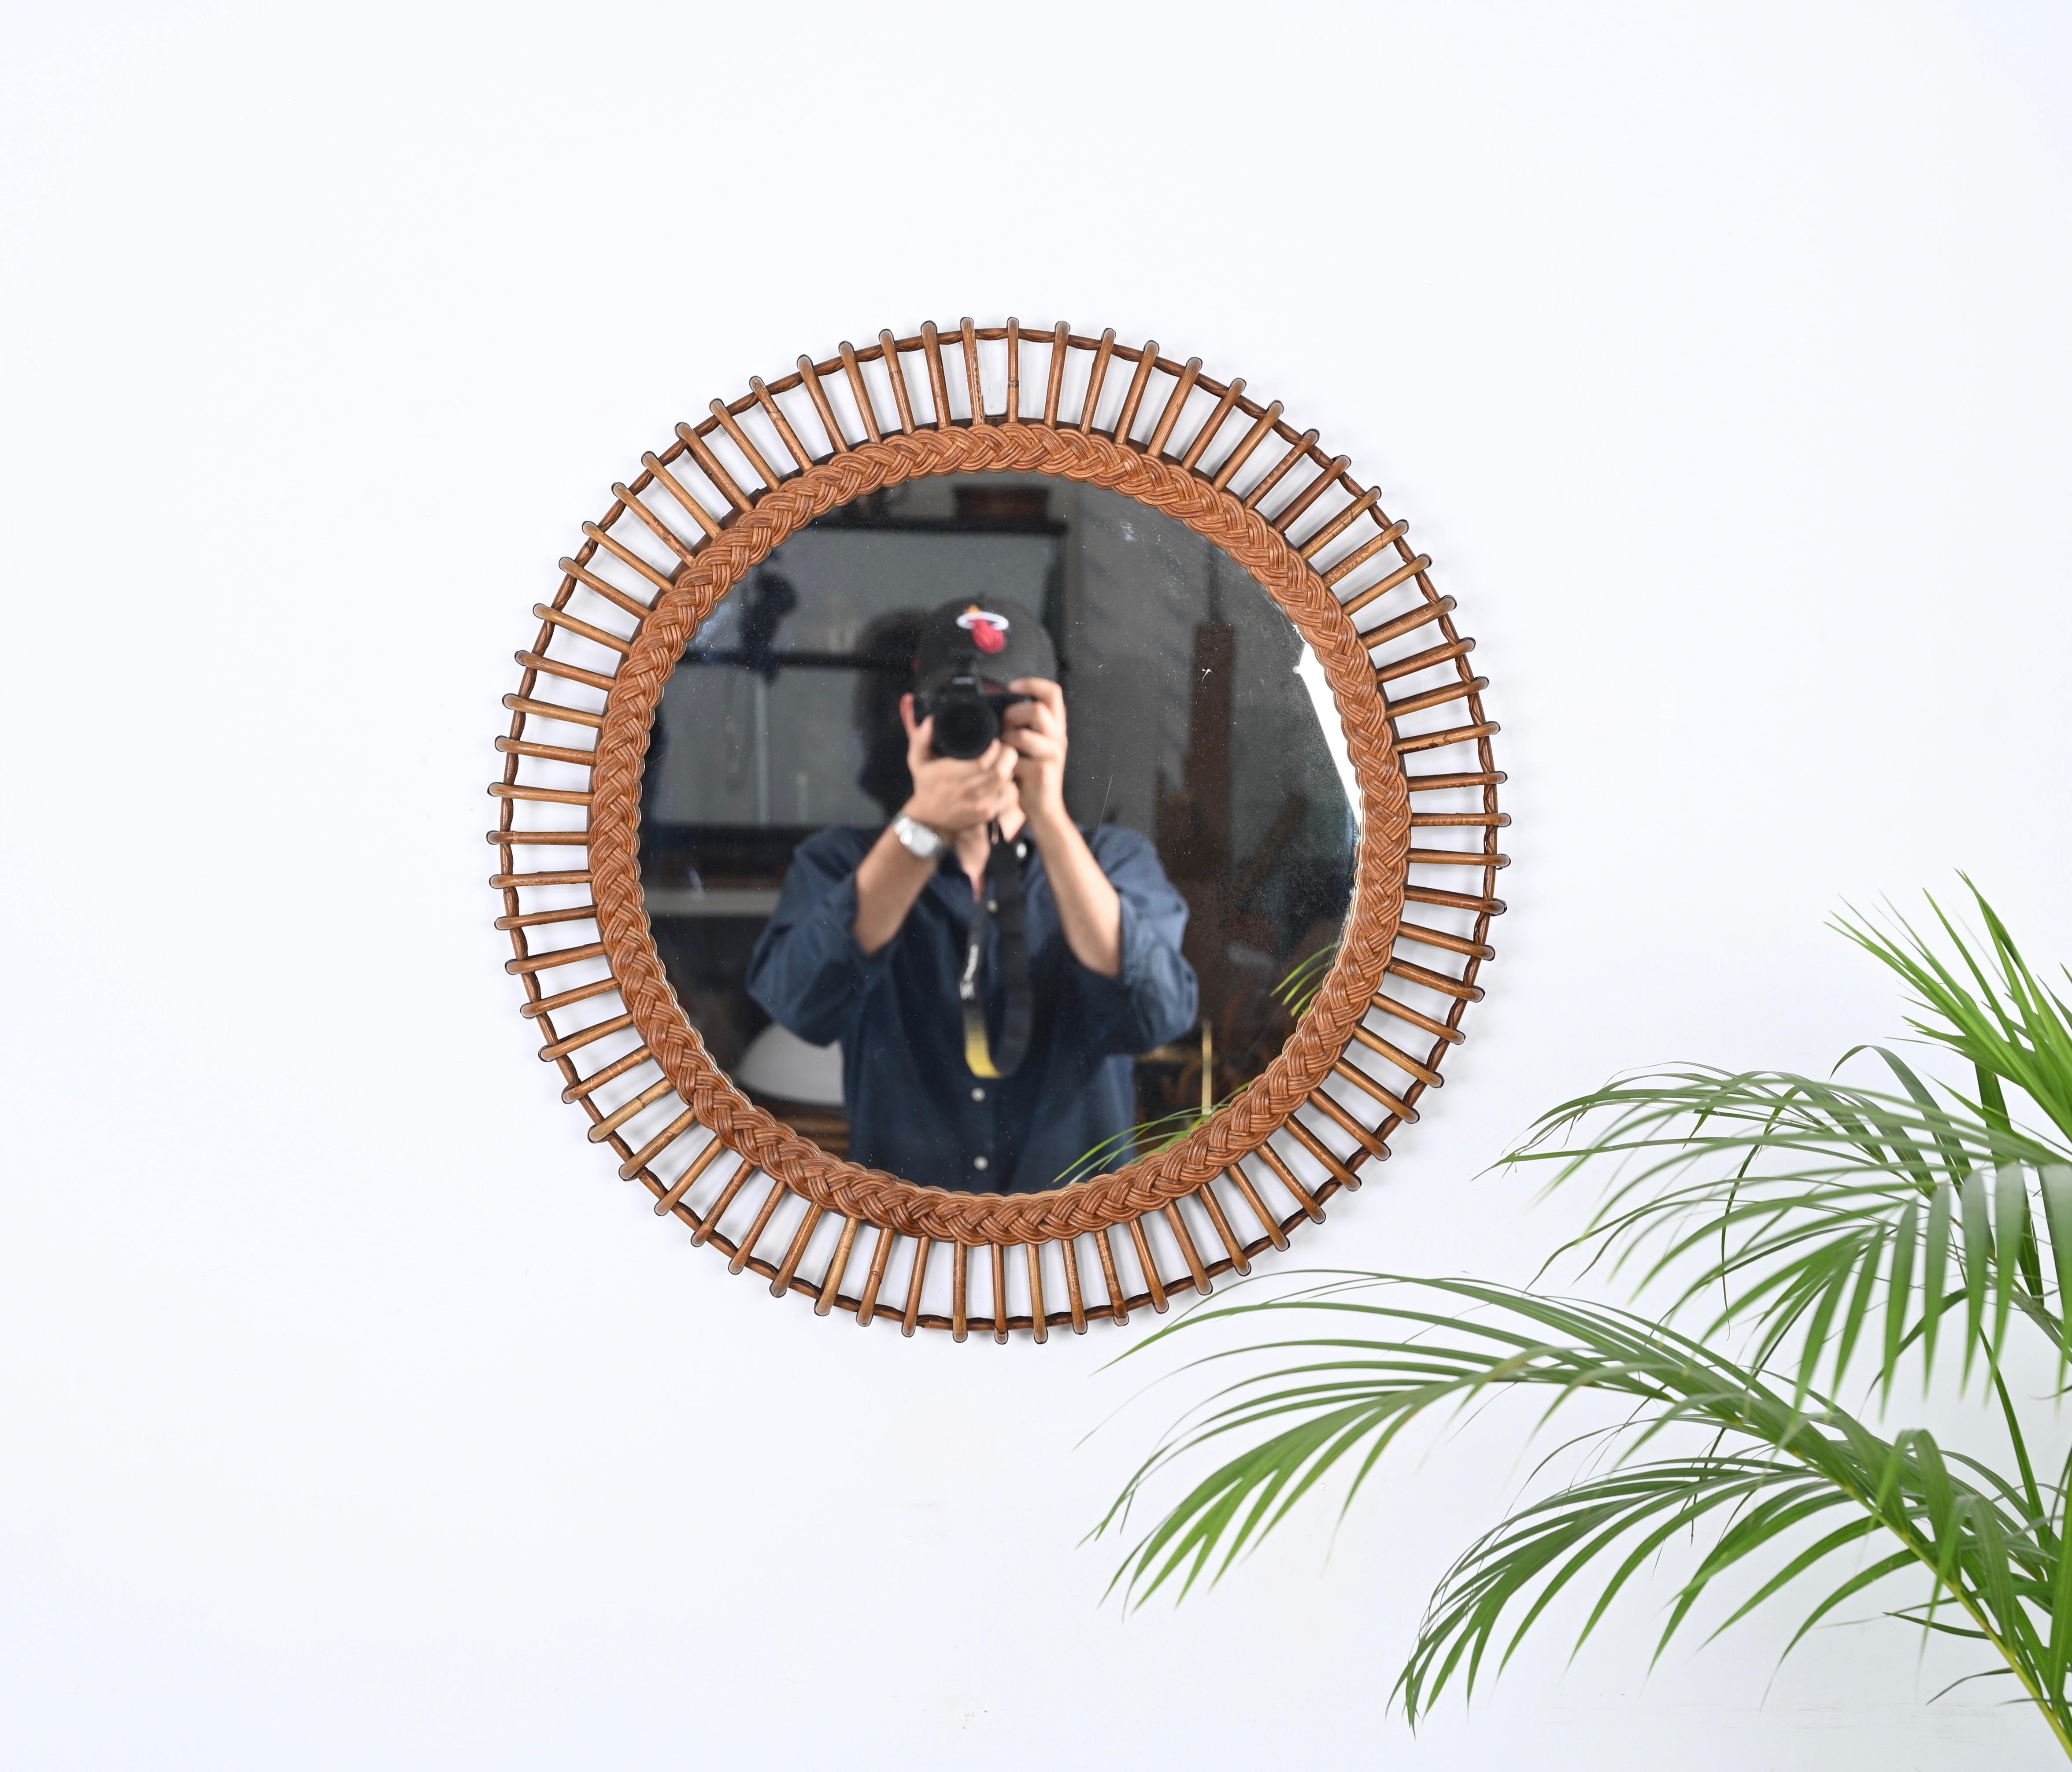 Marvelous mid-century French Riviera style round mirror in Rattan and Bamboo. This beautiful piece was produced in in Italy during the 1960s. 

This stunning mirror has a double frame idecorated by stunning curved rattan beams and wicker. The